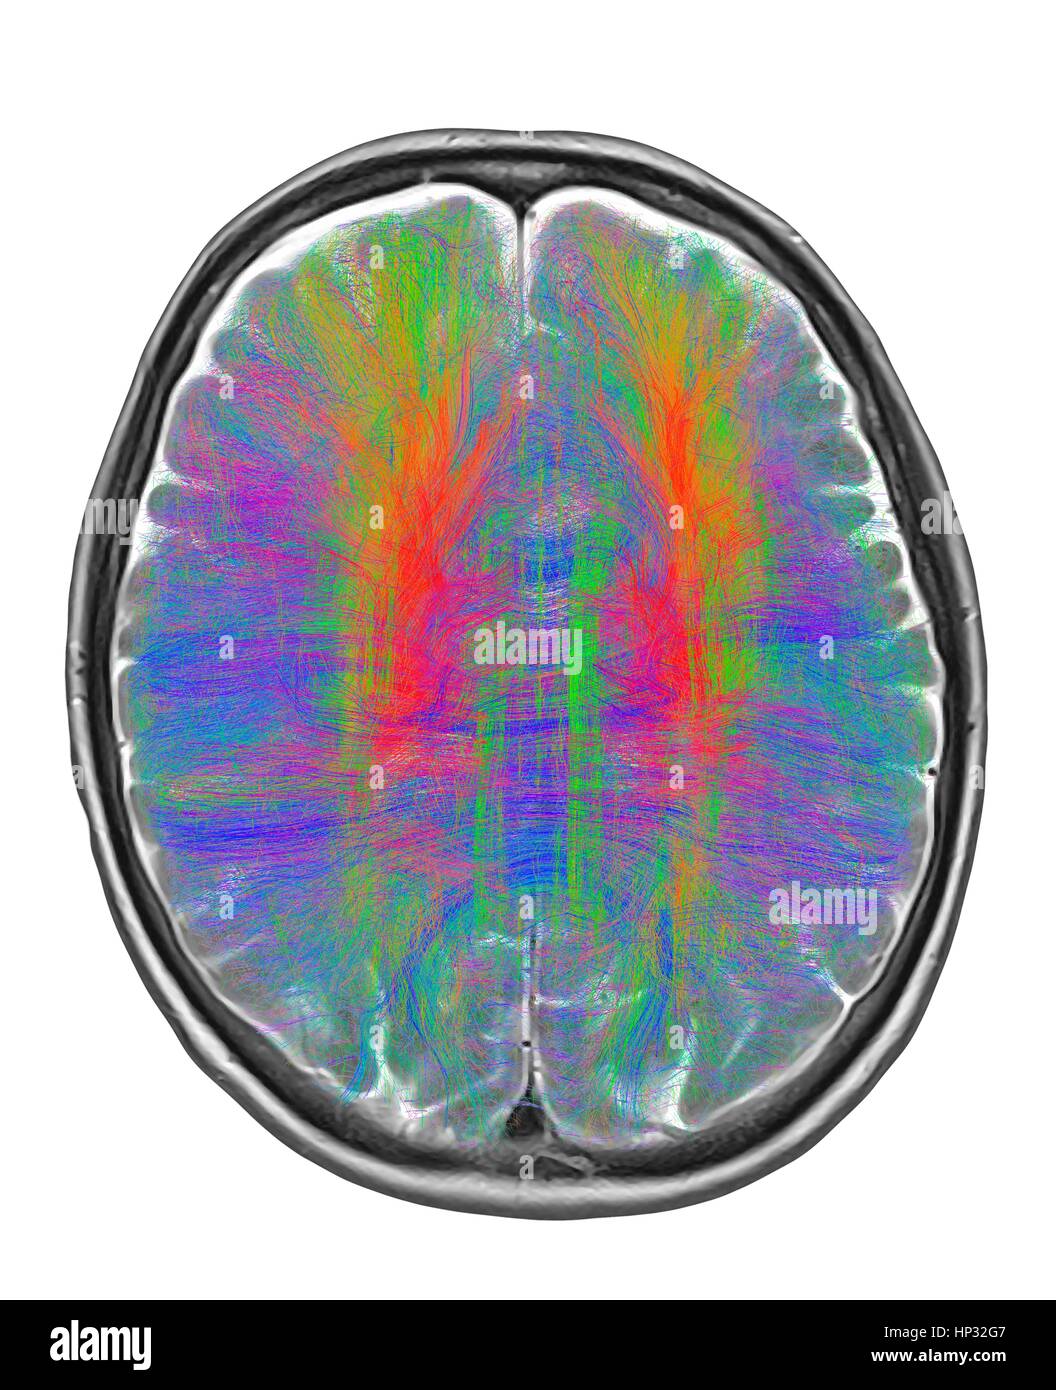 Computer artwork of MRI top view of brain showing white matter fibres.Coloured 3D diffusion spectral imaging (DSI) scan of bundles of white matter nerve fibres in brain.The fibres transmit nerve signals between brain regions between brain spinal cord.Diffusion spectrum imaging (DSI) is variant of Stock Photo